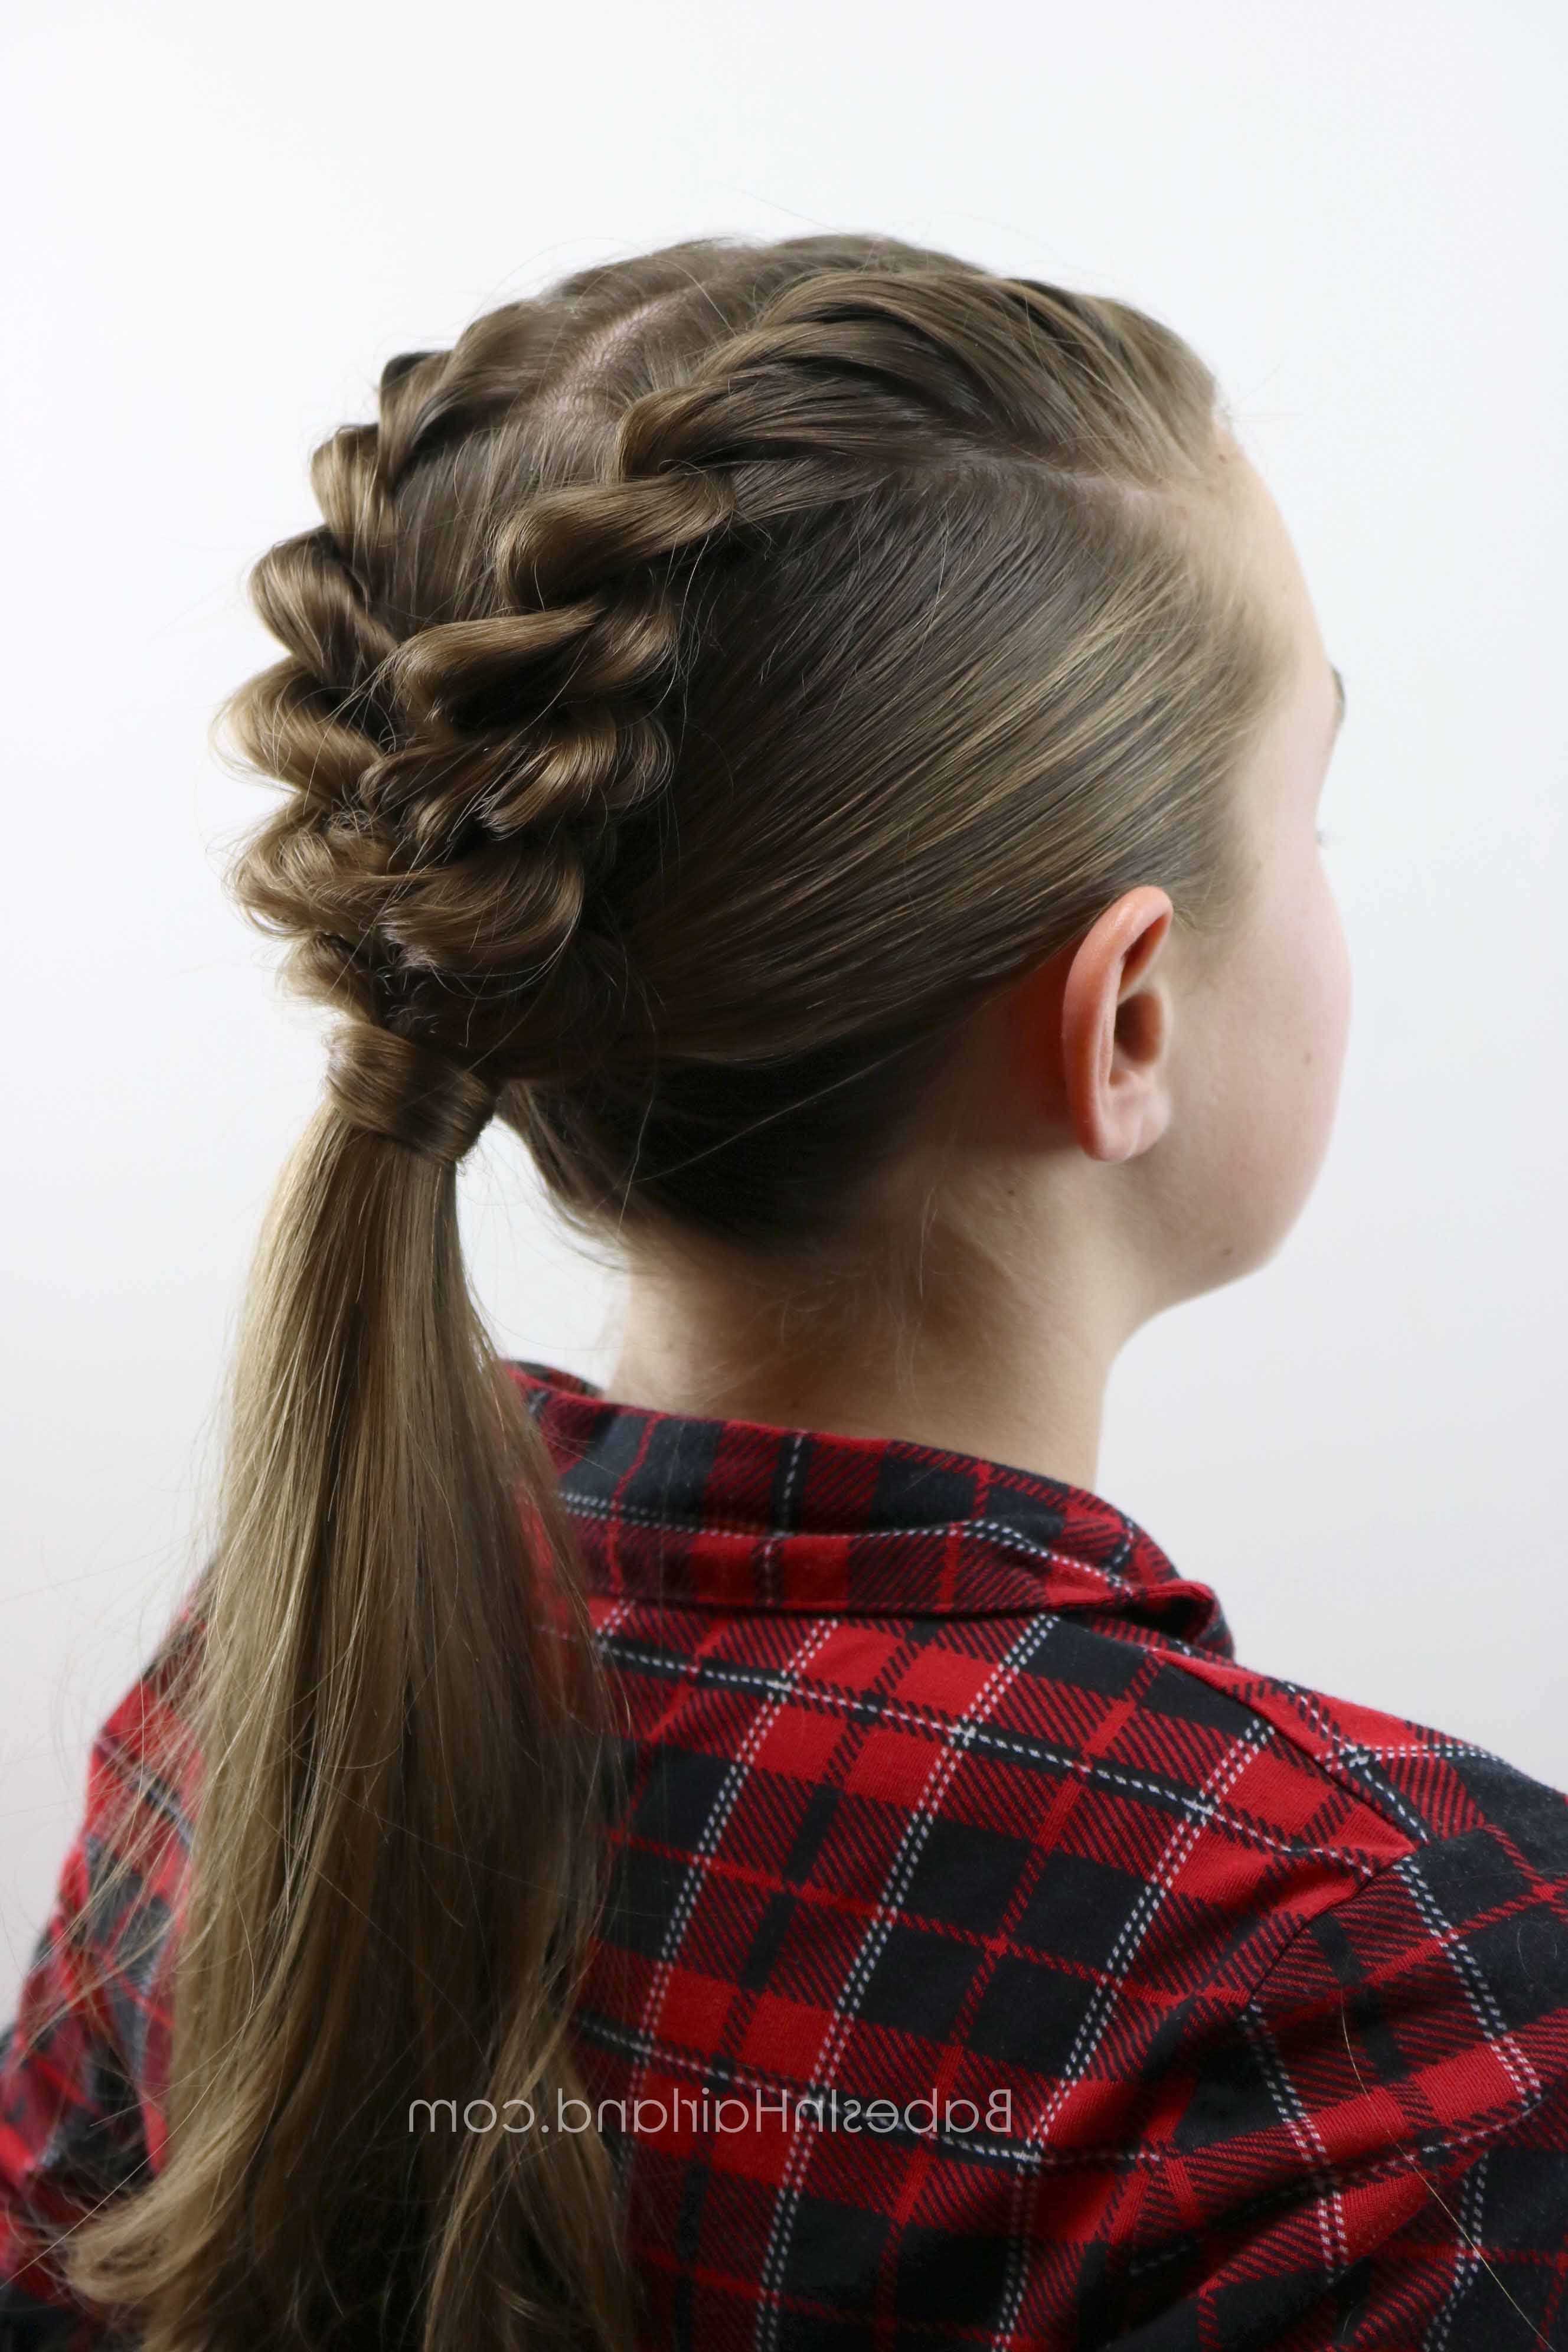 Hair Styles, French Pertaining To Well Liked Twist Into Ponytail Hairstyles (View 13 of 20)